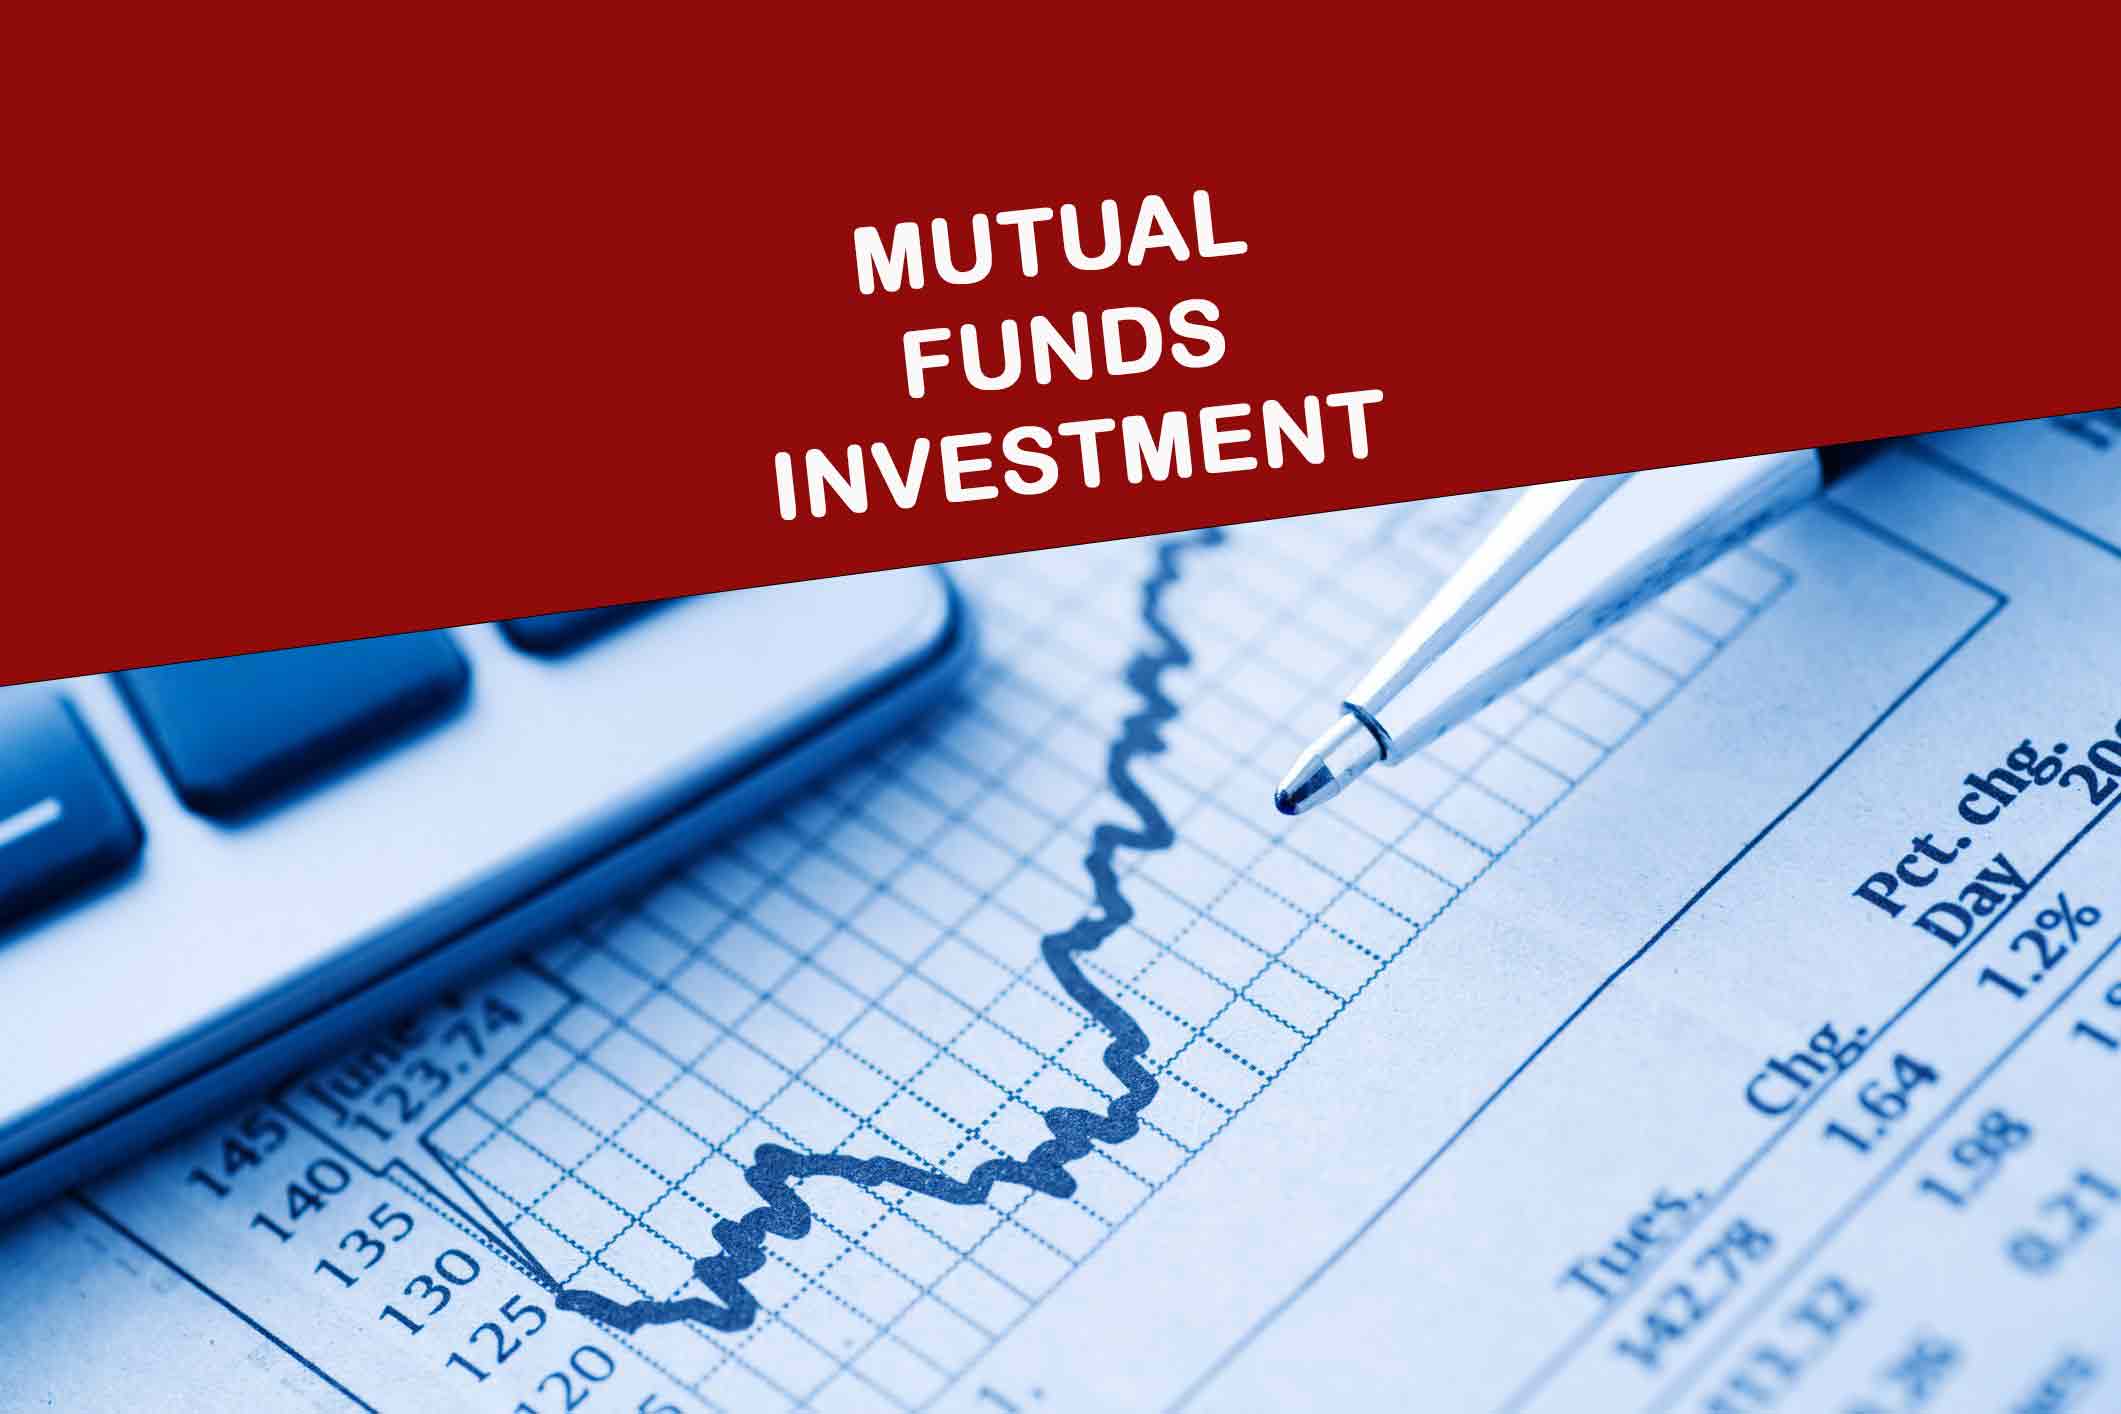 Can I withdraw money from mutual fund anytime?